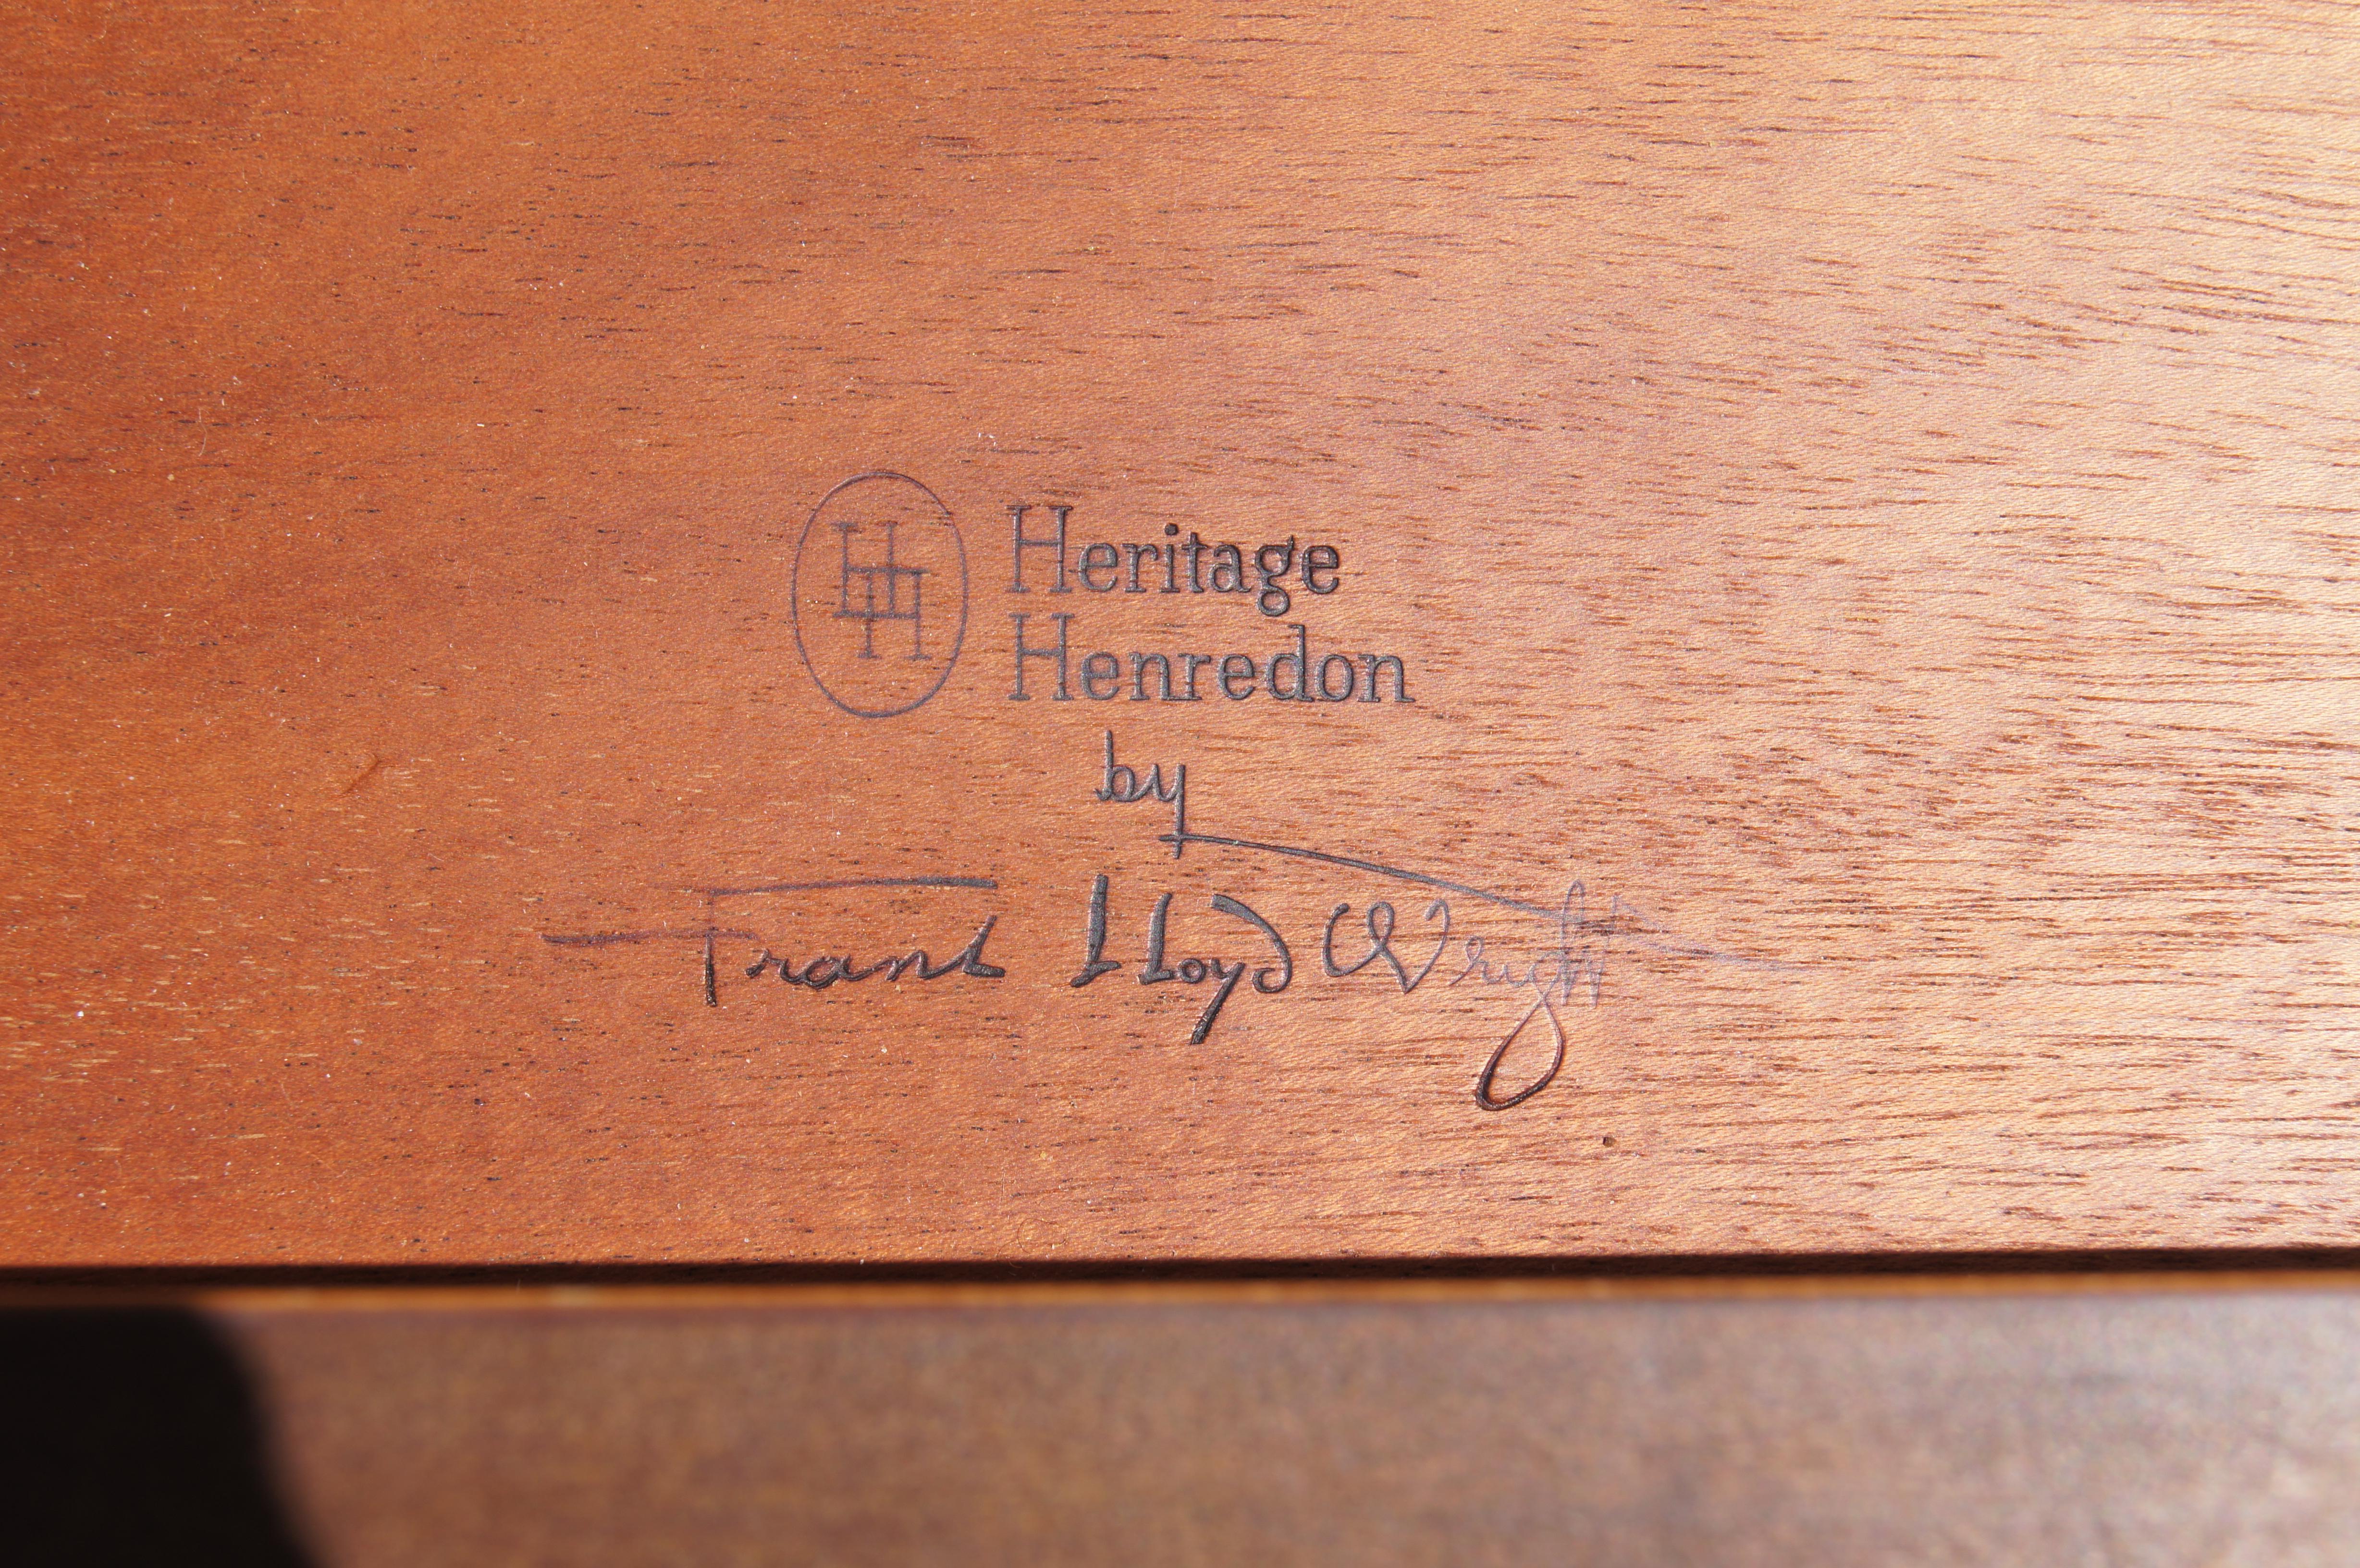 Mid-20th Century Pair of Taliesin Nightstands by Frank Lloyd Wright for Heritage-Henredon